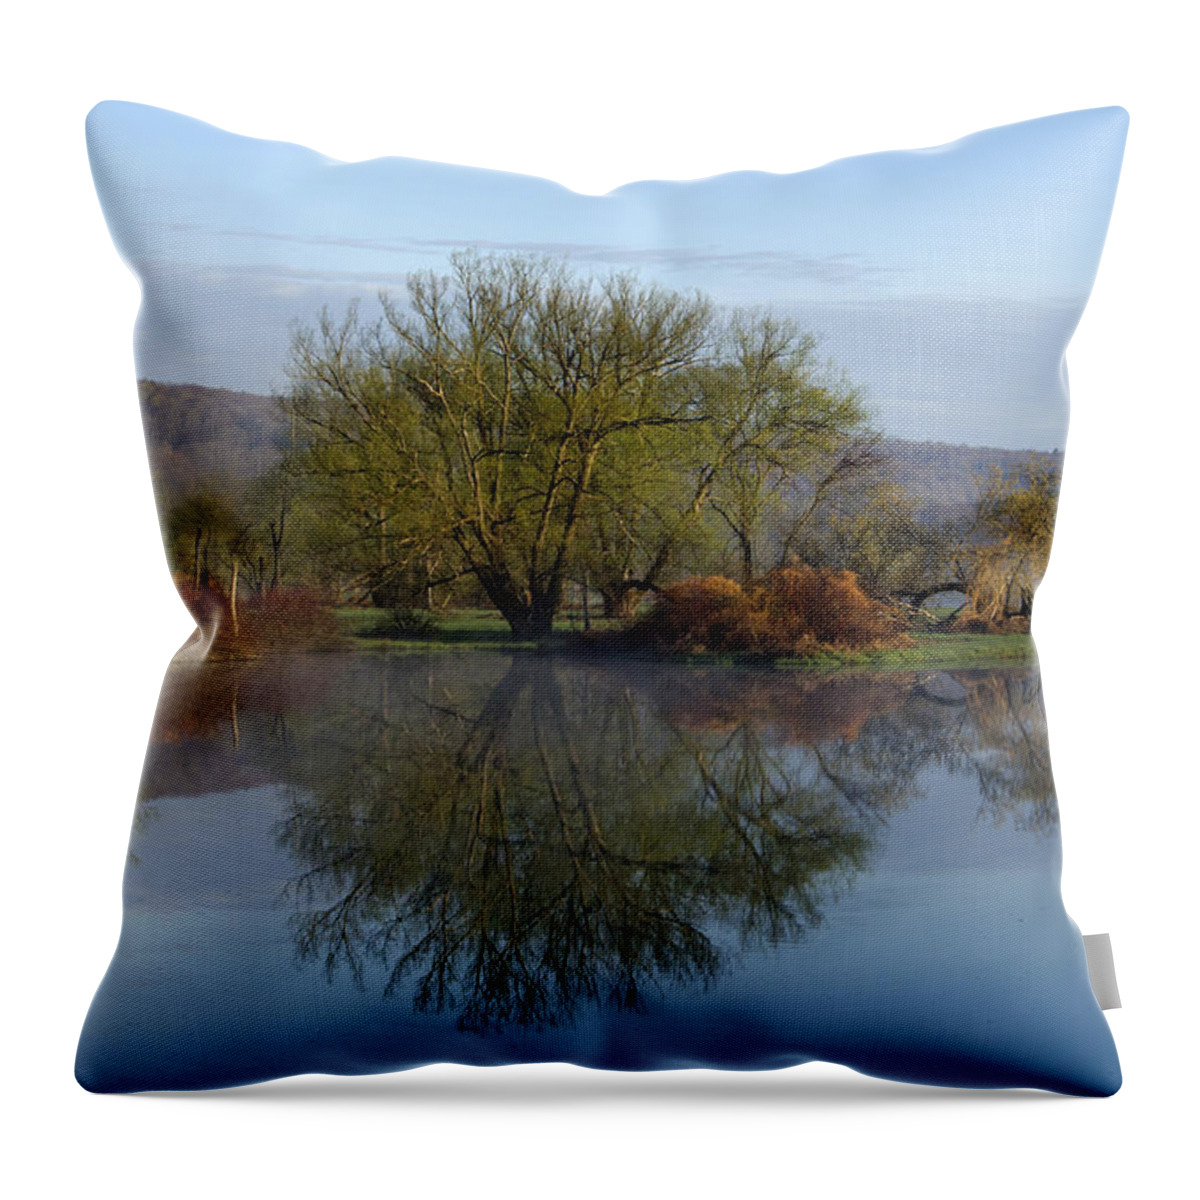 Peaceful Throw Pillow featuring the photograph Peaceful Reflection Landscape by Christina Rollo